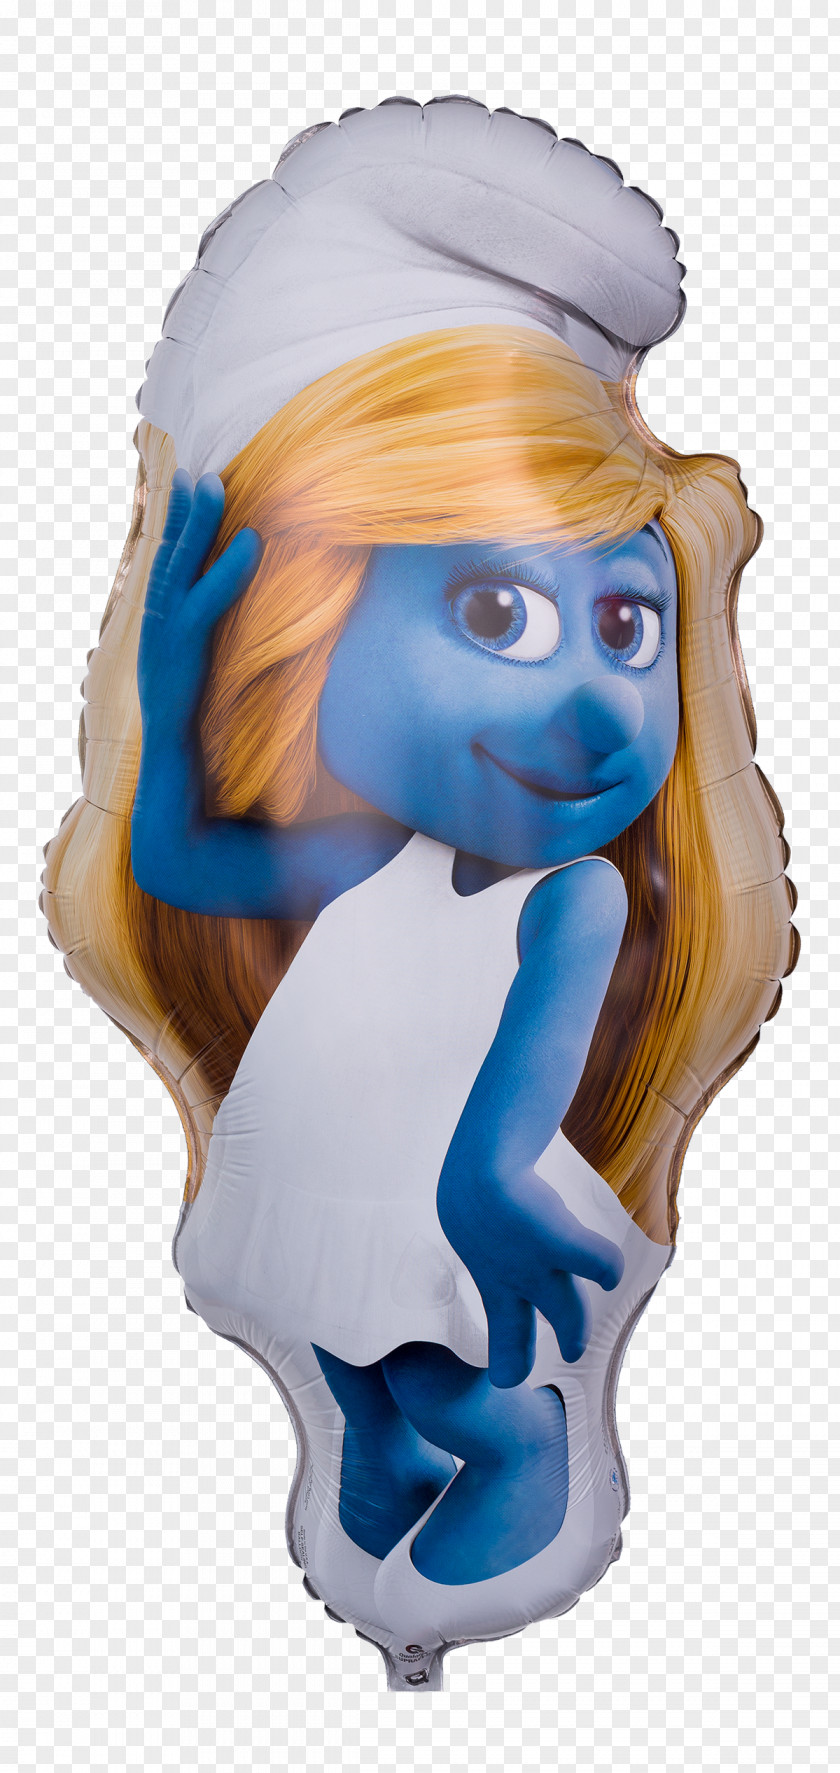 Chuck Buzz The Smurfette Vanity Smurf Toy Balloon Smurfs PNG